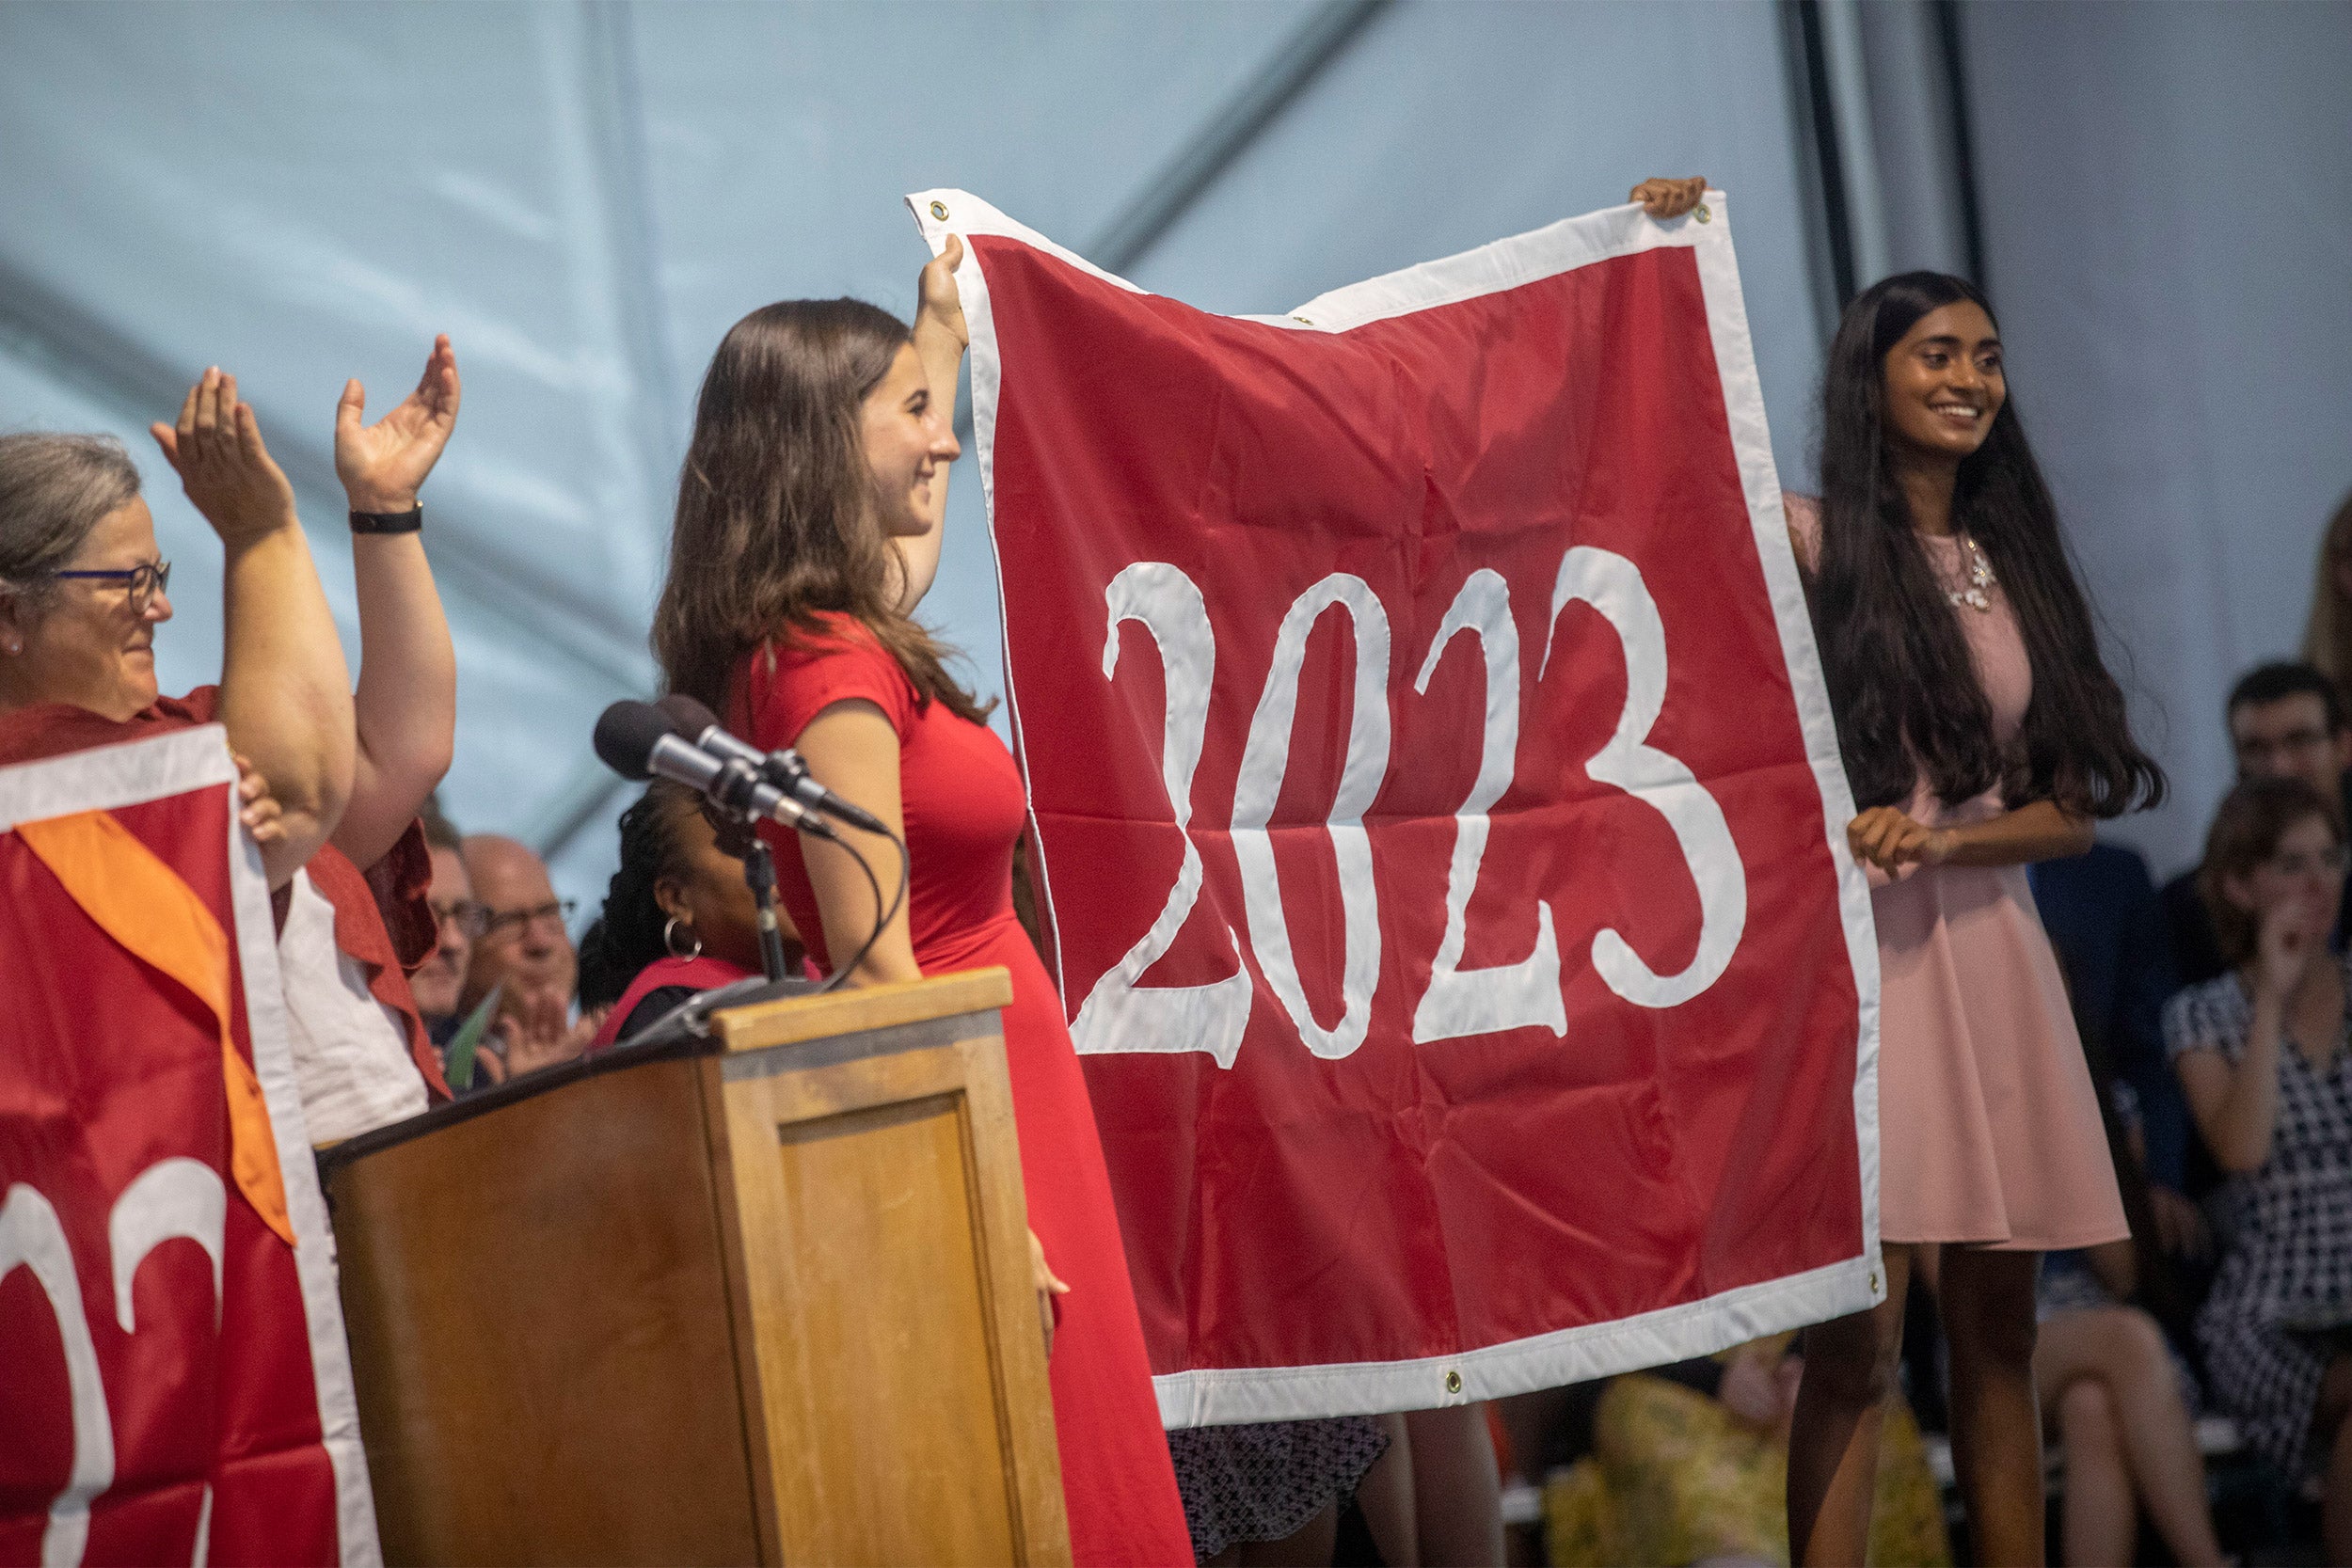 Presentation of the Class of 2023 banner